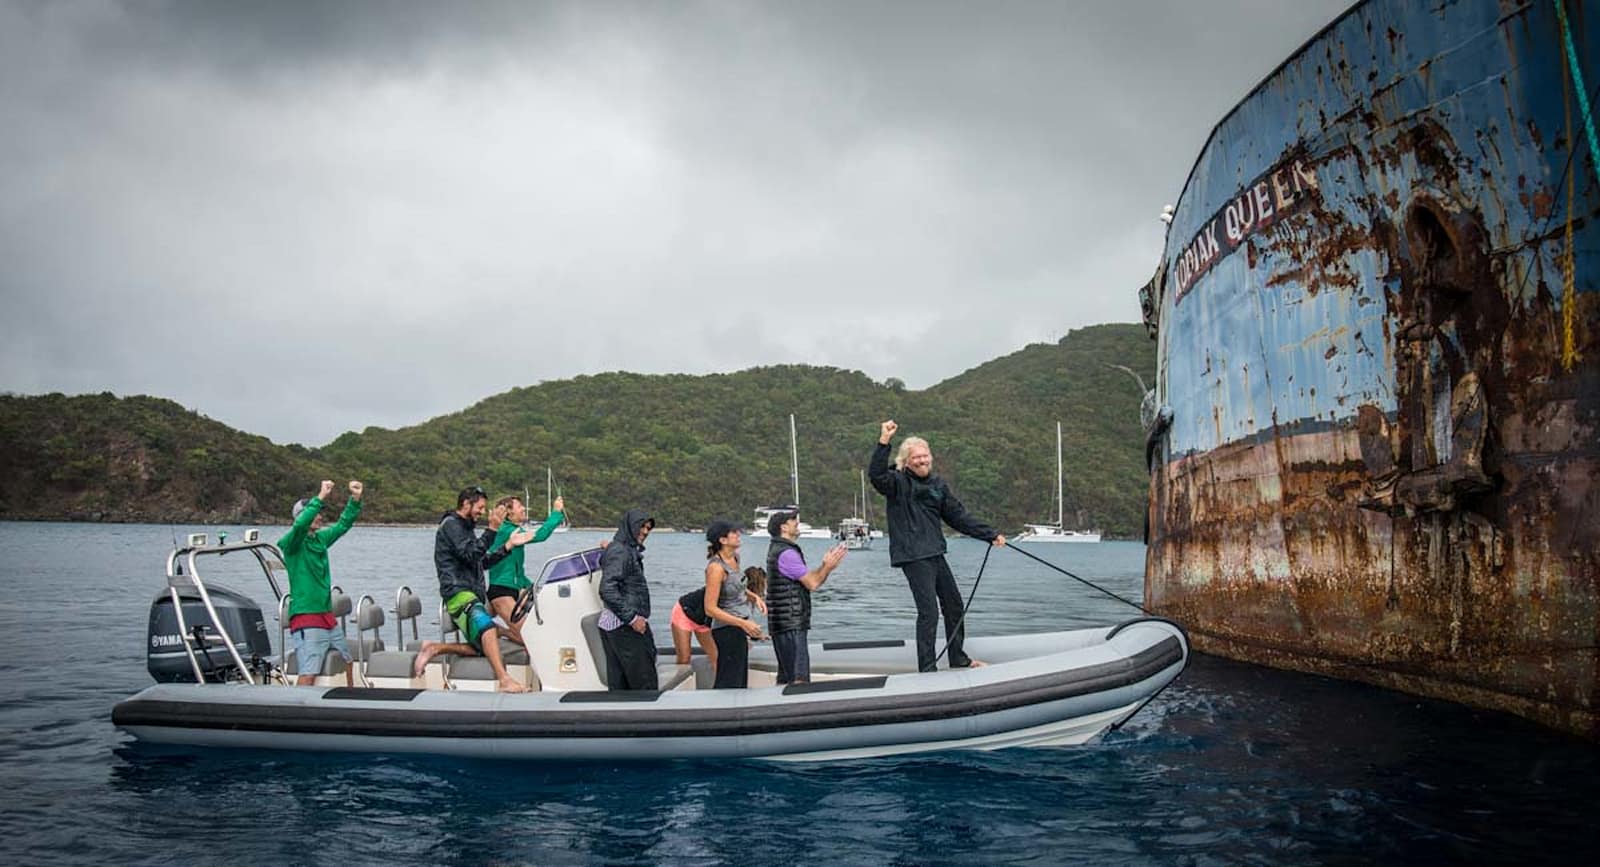 Richard Branson and group on a boat next to the Kodiak Queen 